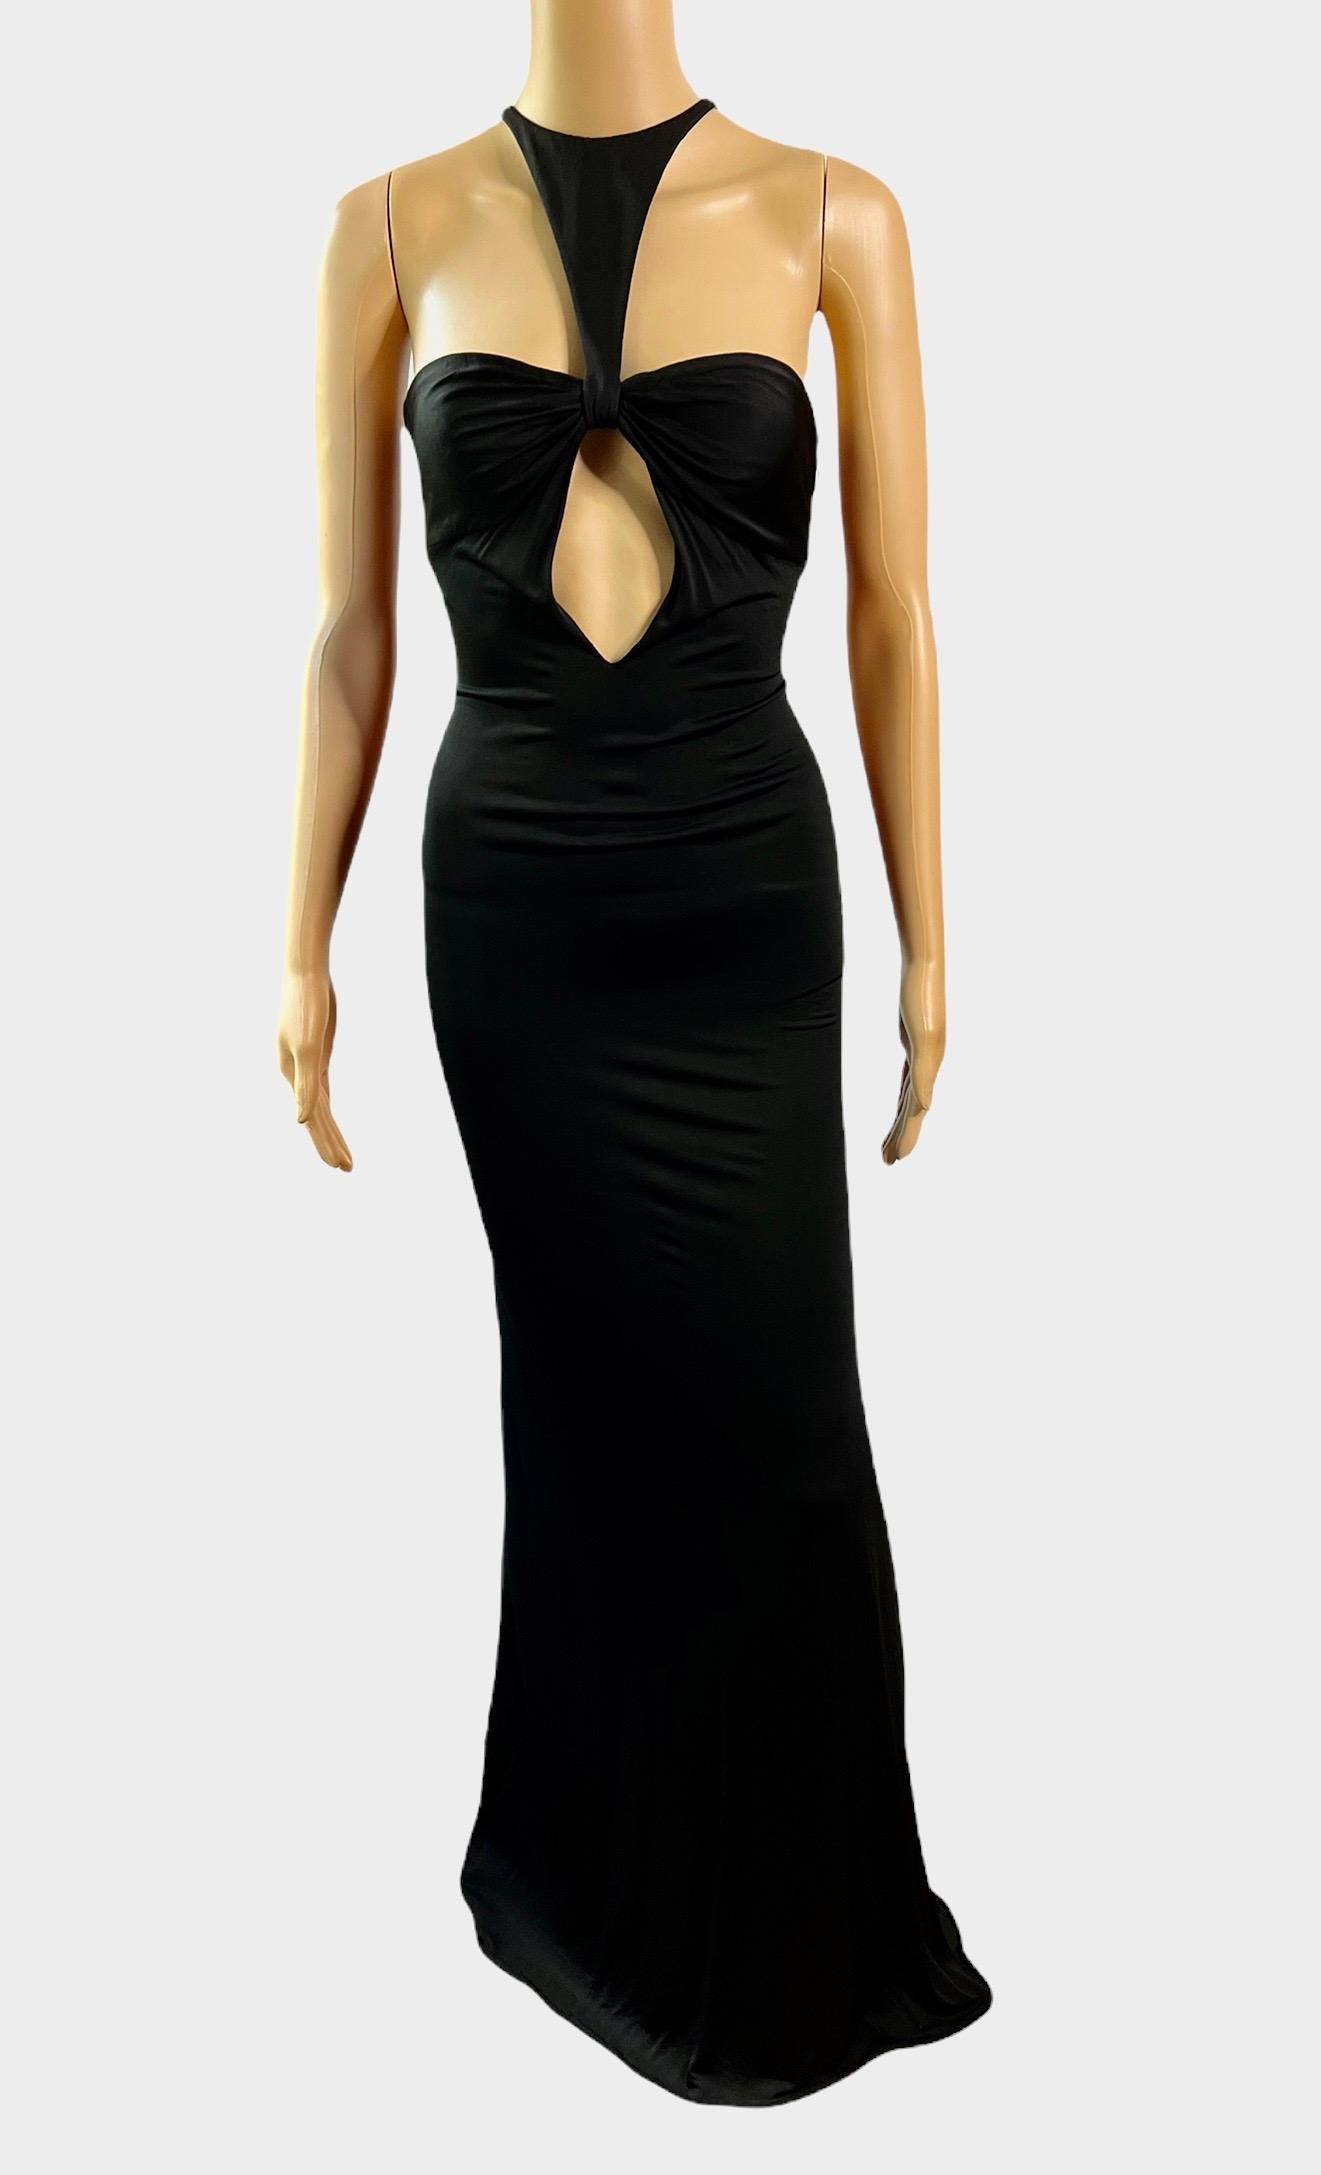 Tom Ford for Gucci F/W 2004 Plunging Cutout Black Evening Dress Gown In Good Condition For Sale In Naples, FL